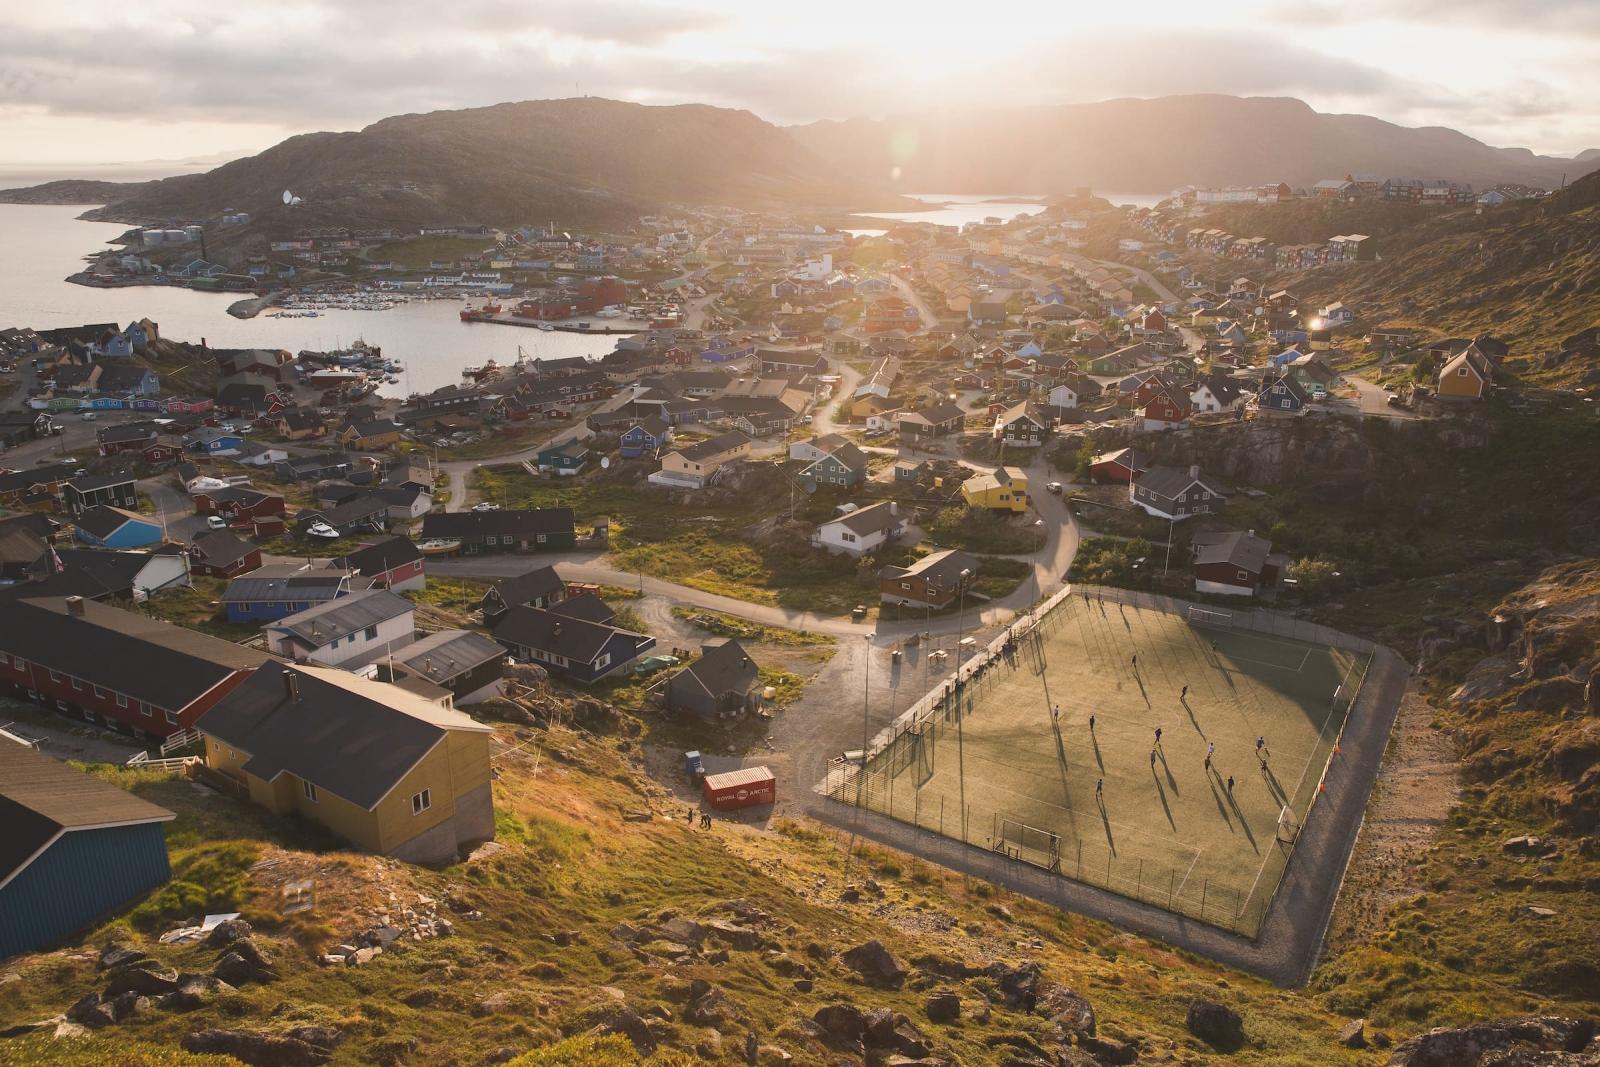 Sunset over a game of soccer and Qaqortoq in South Greenland. Photo by Mads Pihl